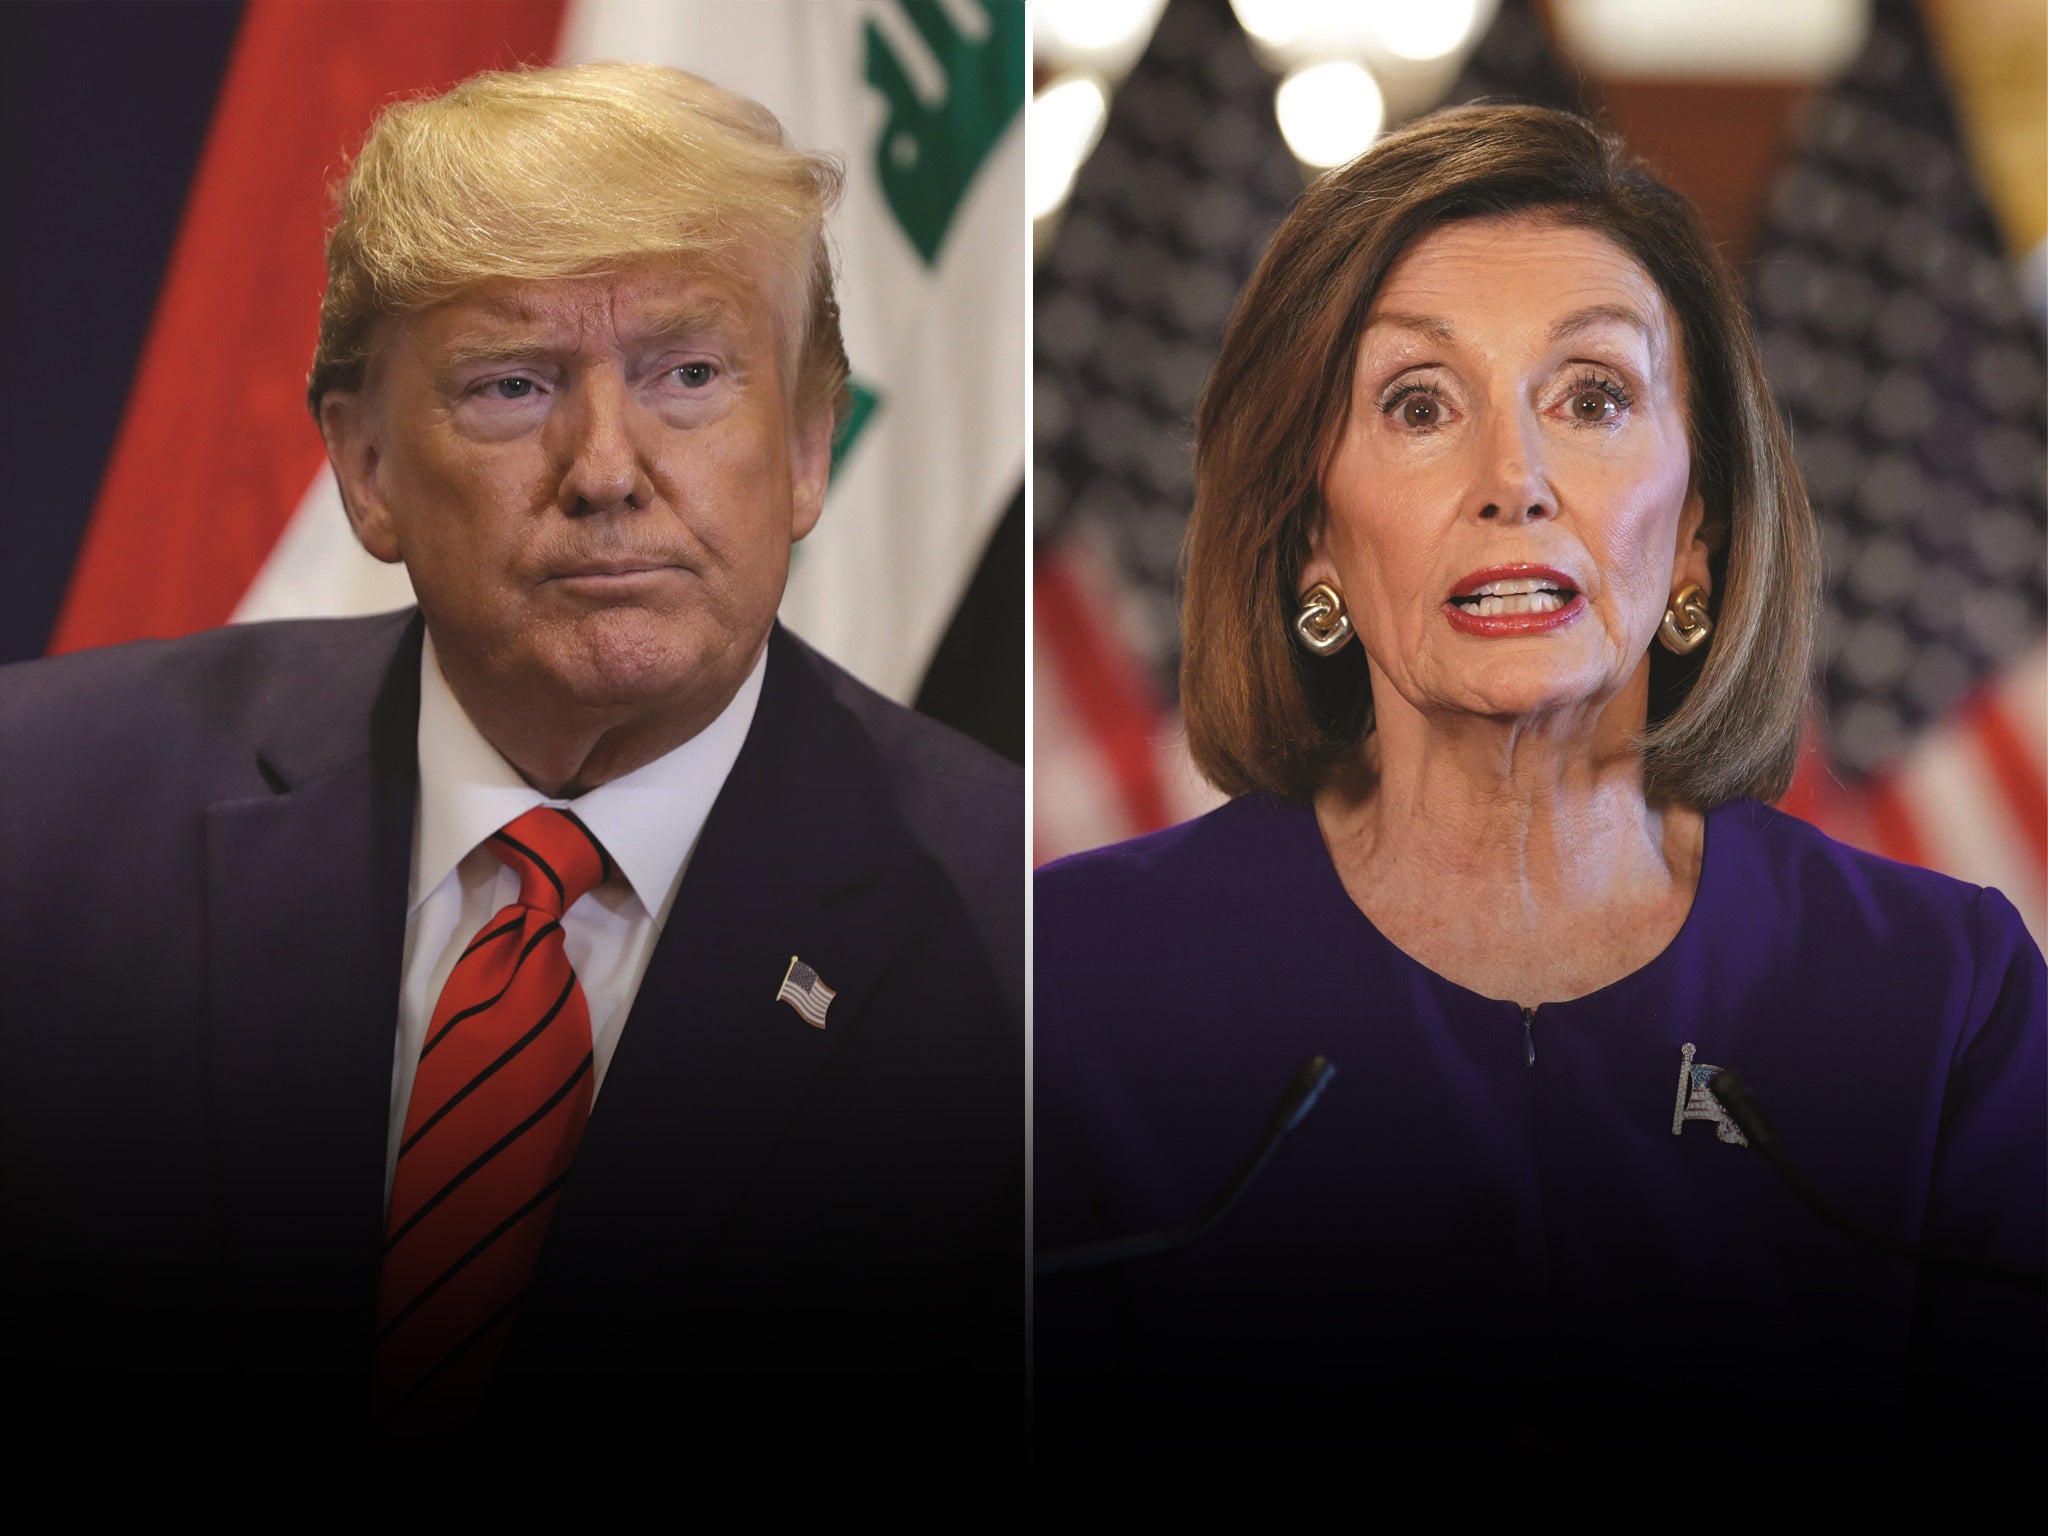 ‘Strike while the iron is hot’: Nancy Pelosi has moved on Trump